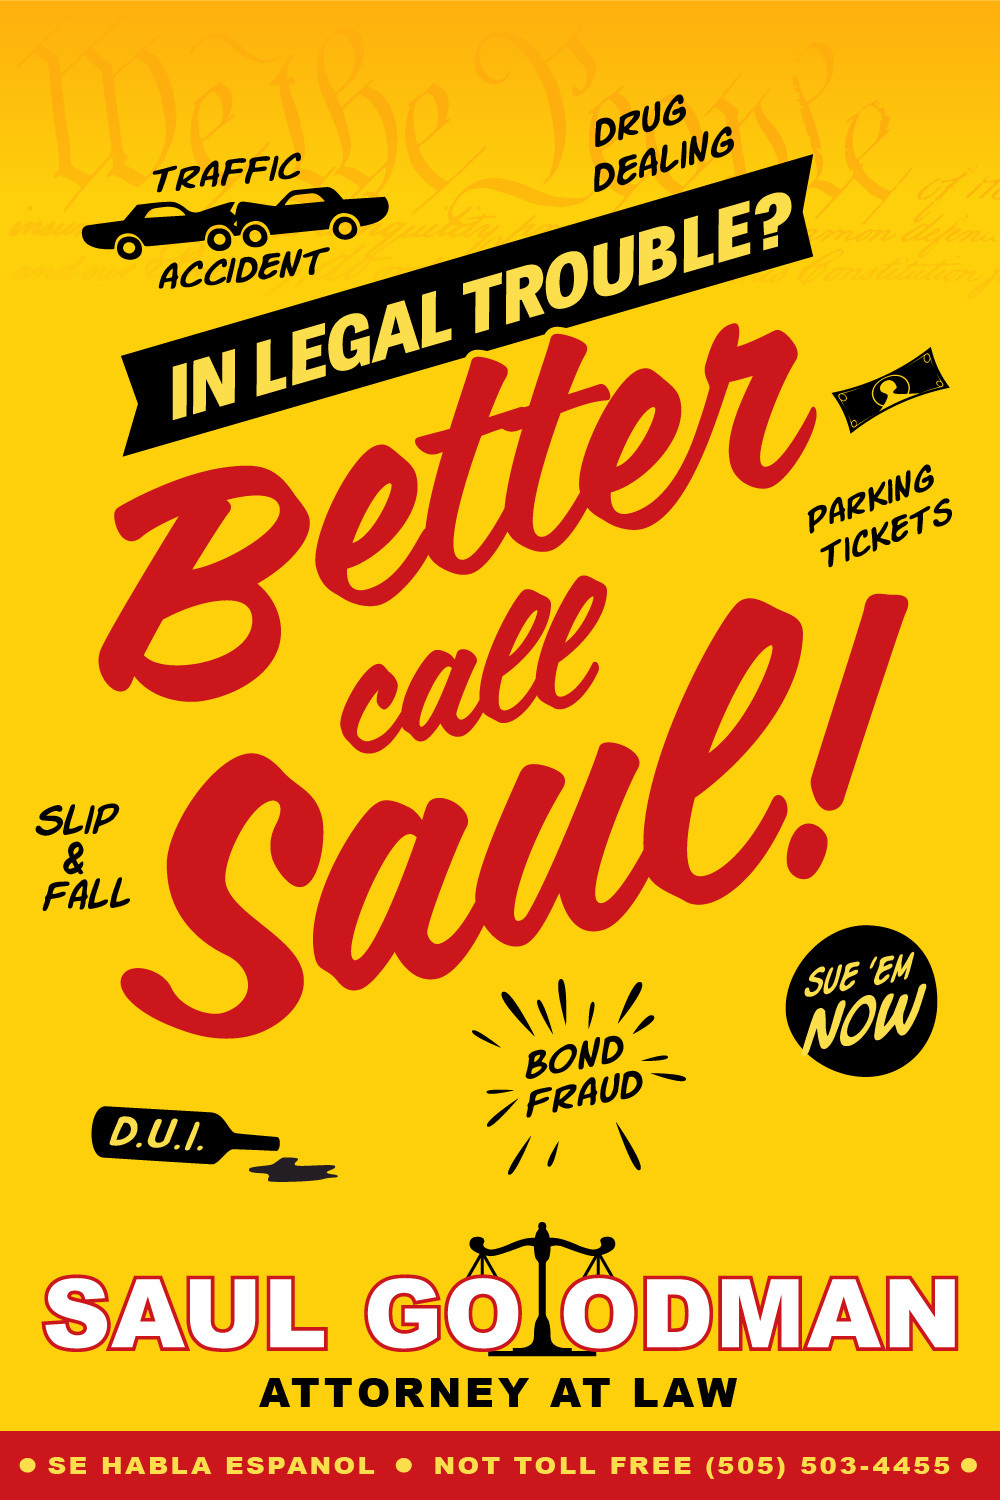 Better Call Saul Picture